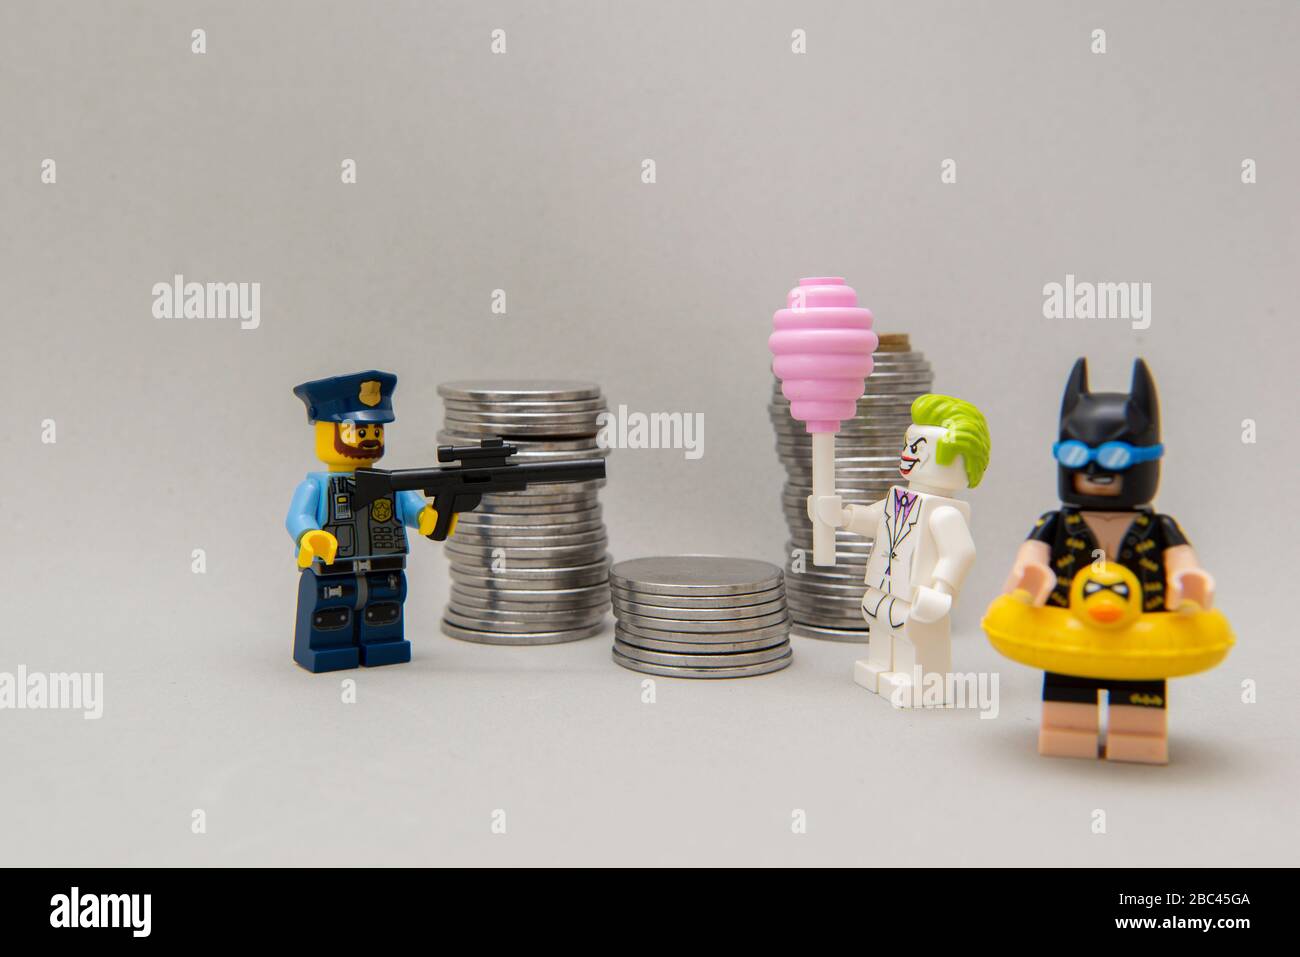 Florianopolis, Brazil, March 28, 2020: Batman minifigure with bathing suit and vacation and joker being arrested by the police. Selective focus. Lego Stock Photo